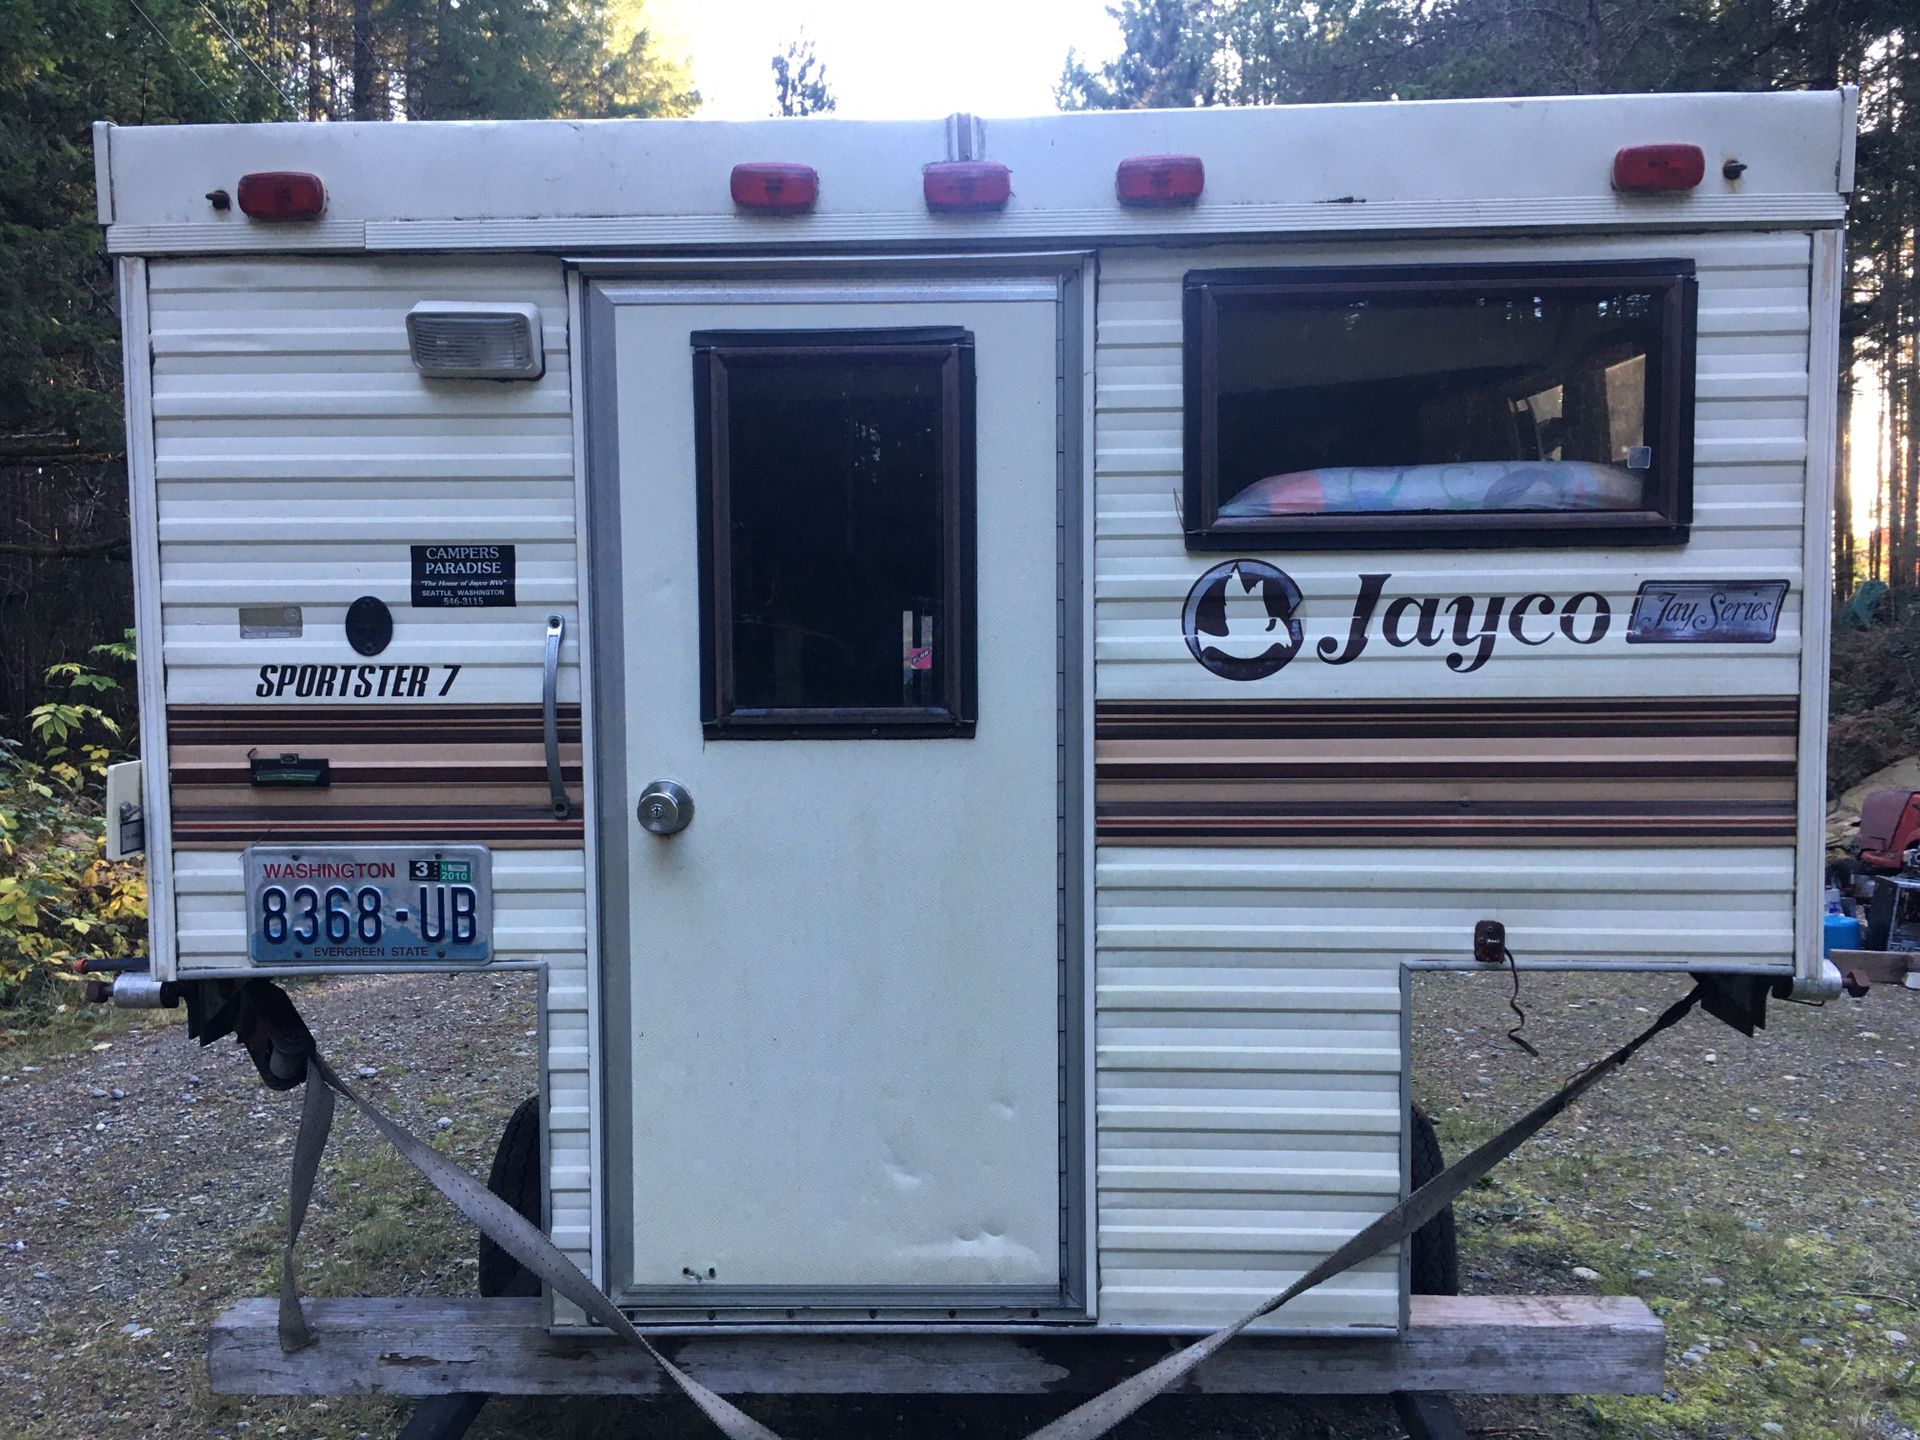 Jayco Sportster 7 Pop Up Camper For Sale In Port Orchard Wa Offerup